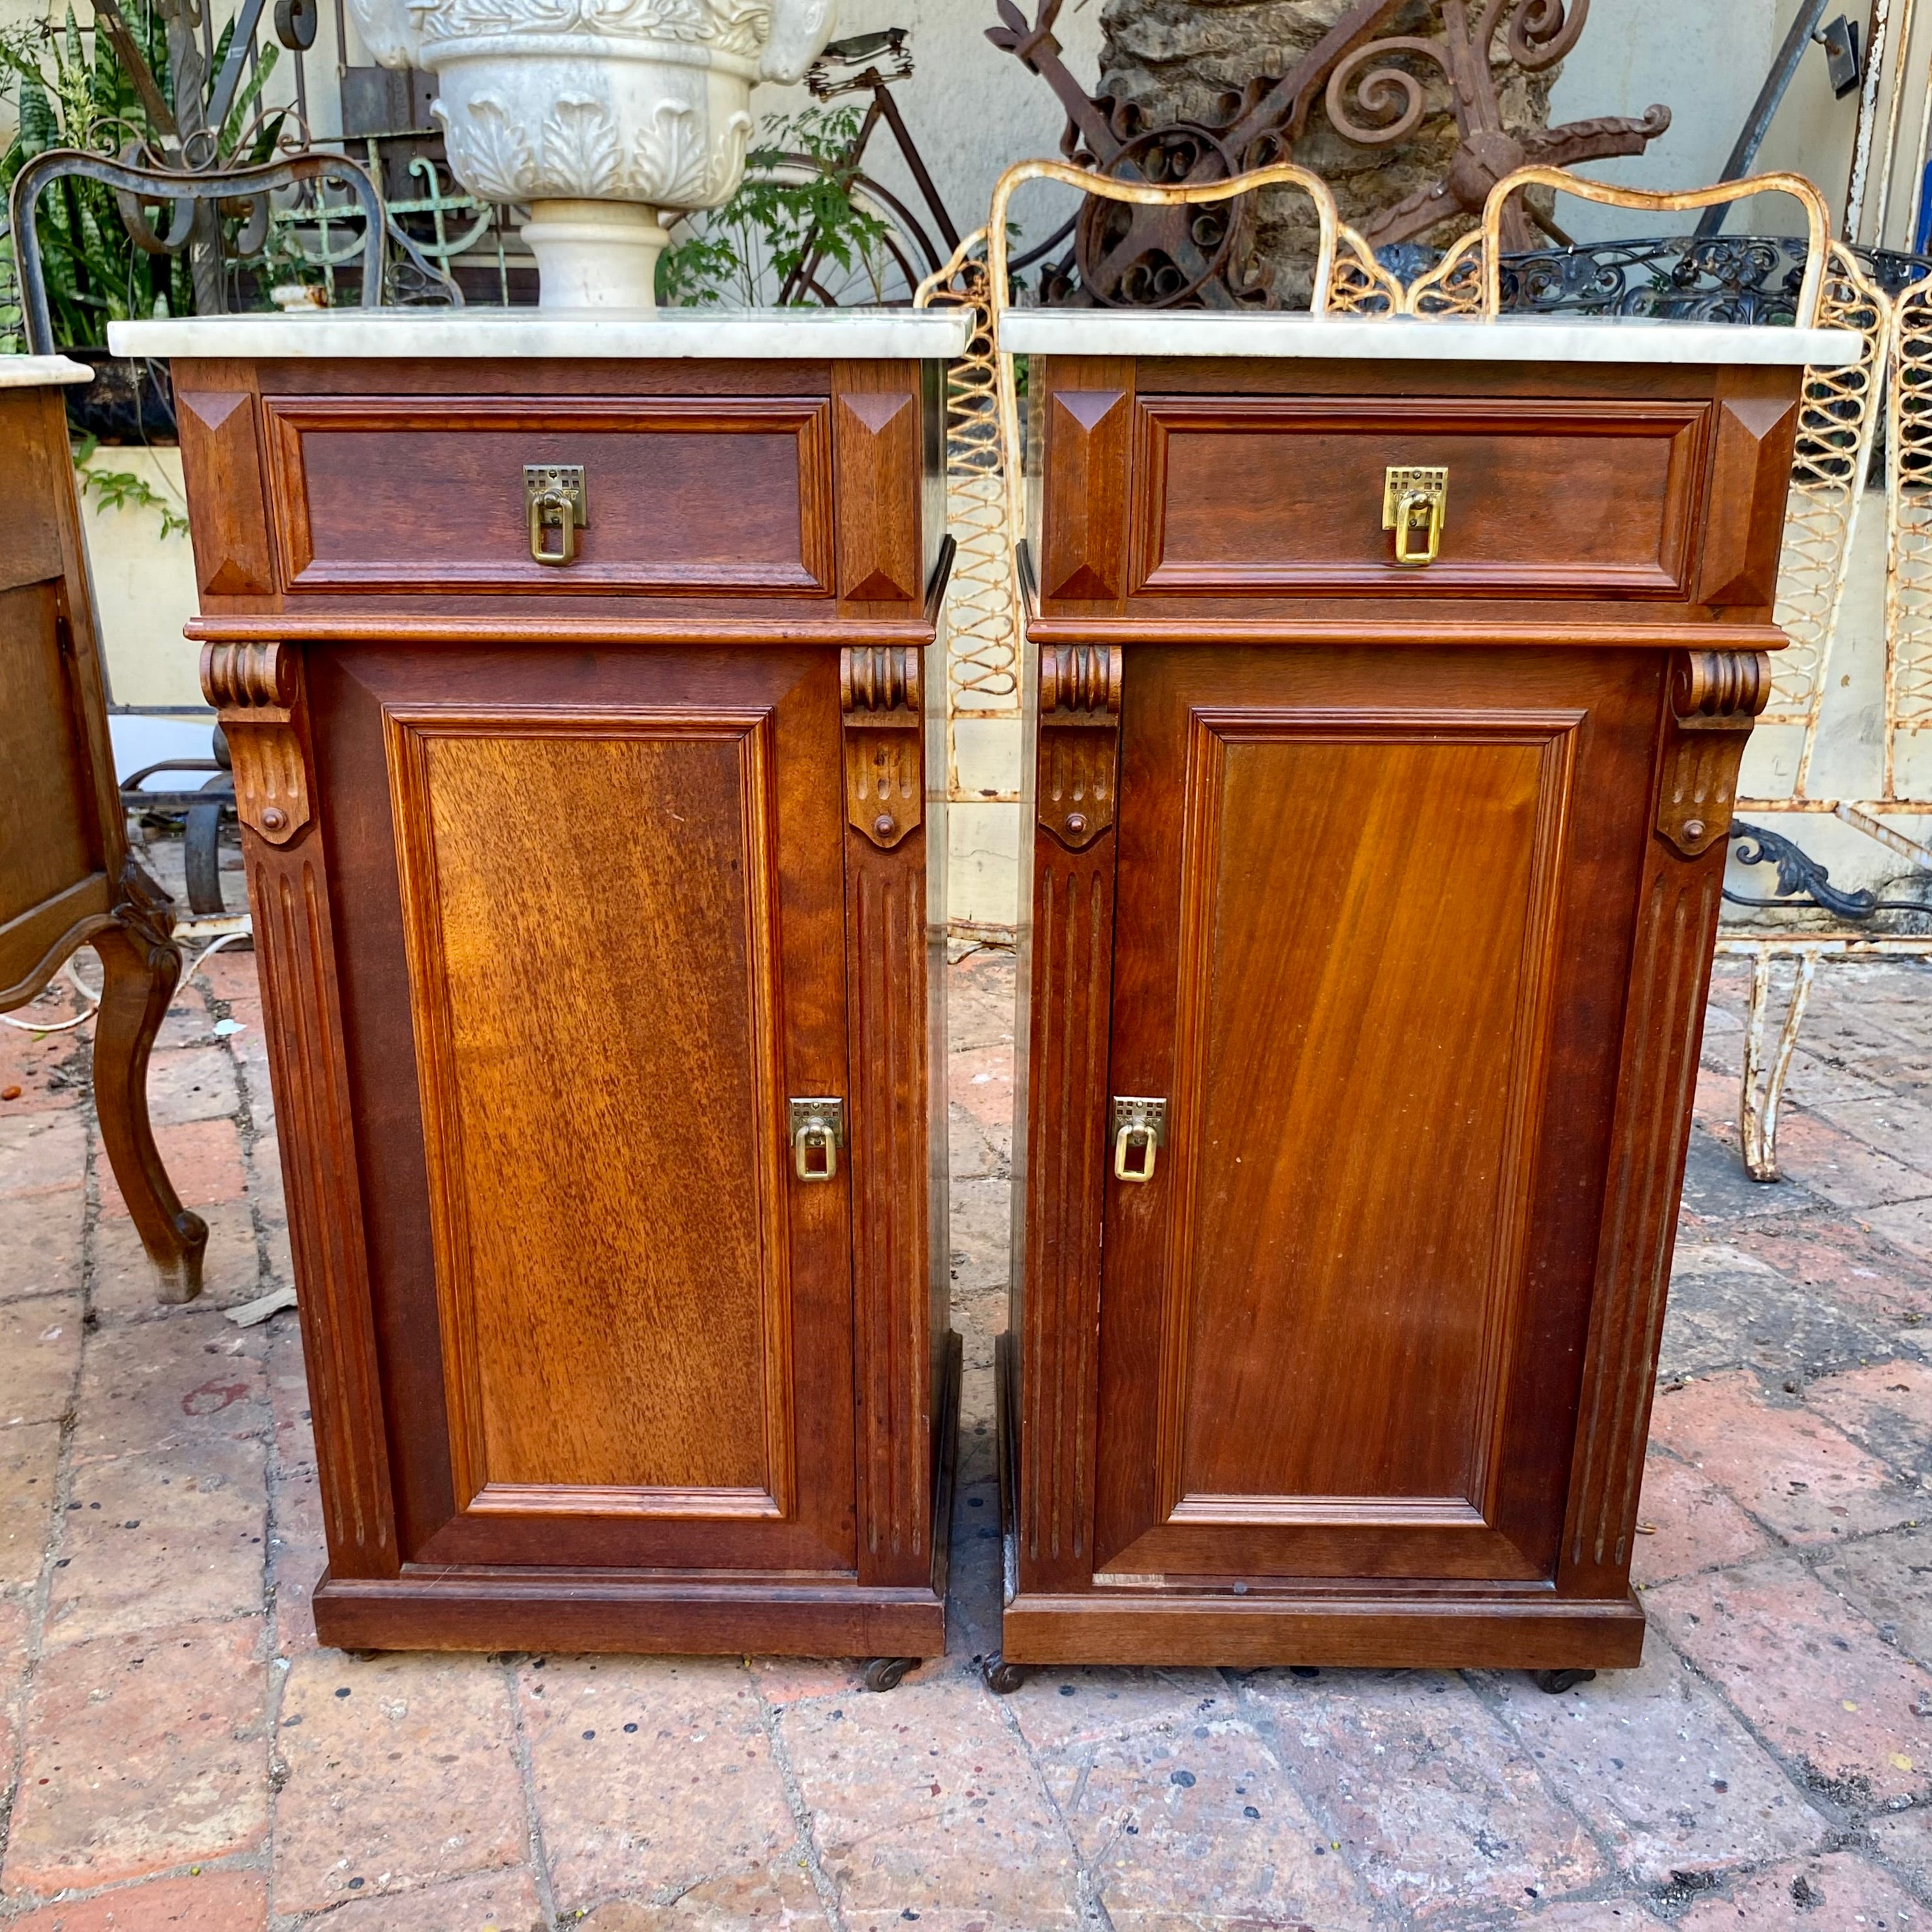 Beautiful Pair of Antique Bedside Pedestals with Brass Handles